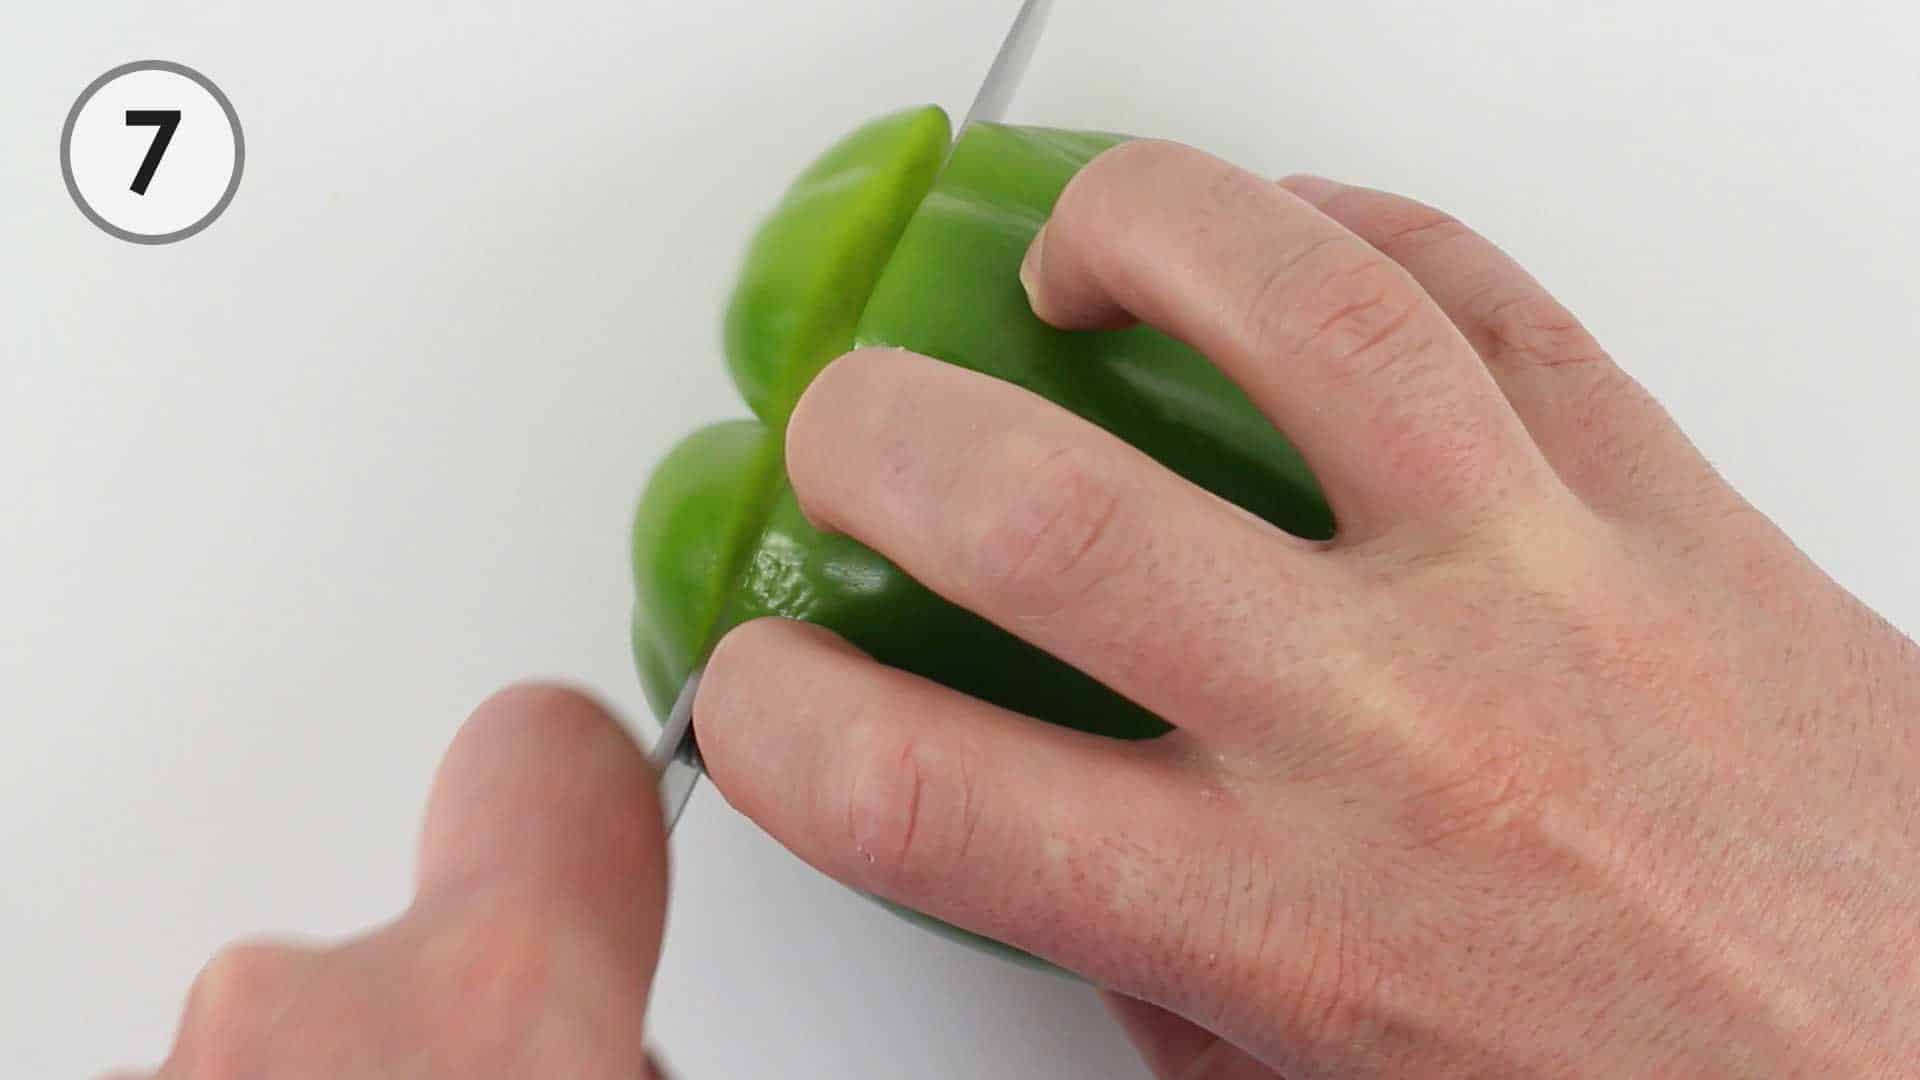 Slicing though the bottom of a bell pepper.